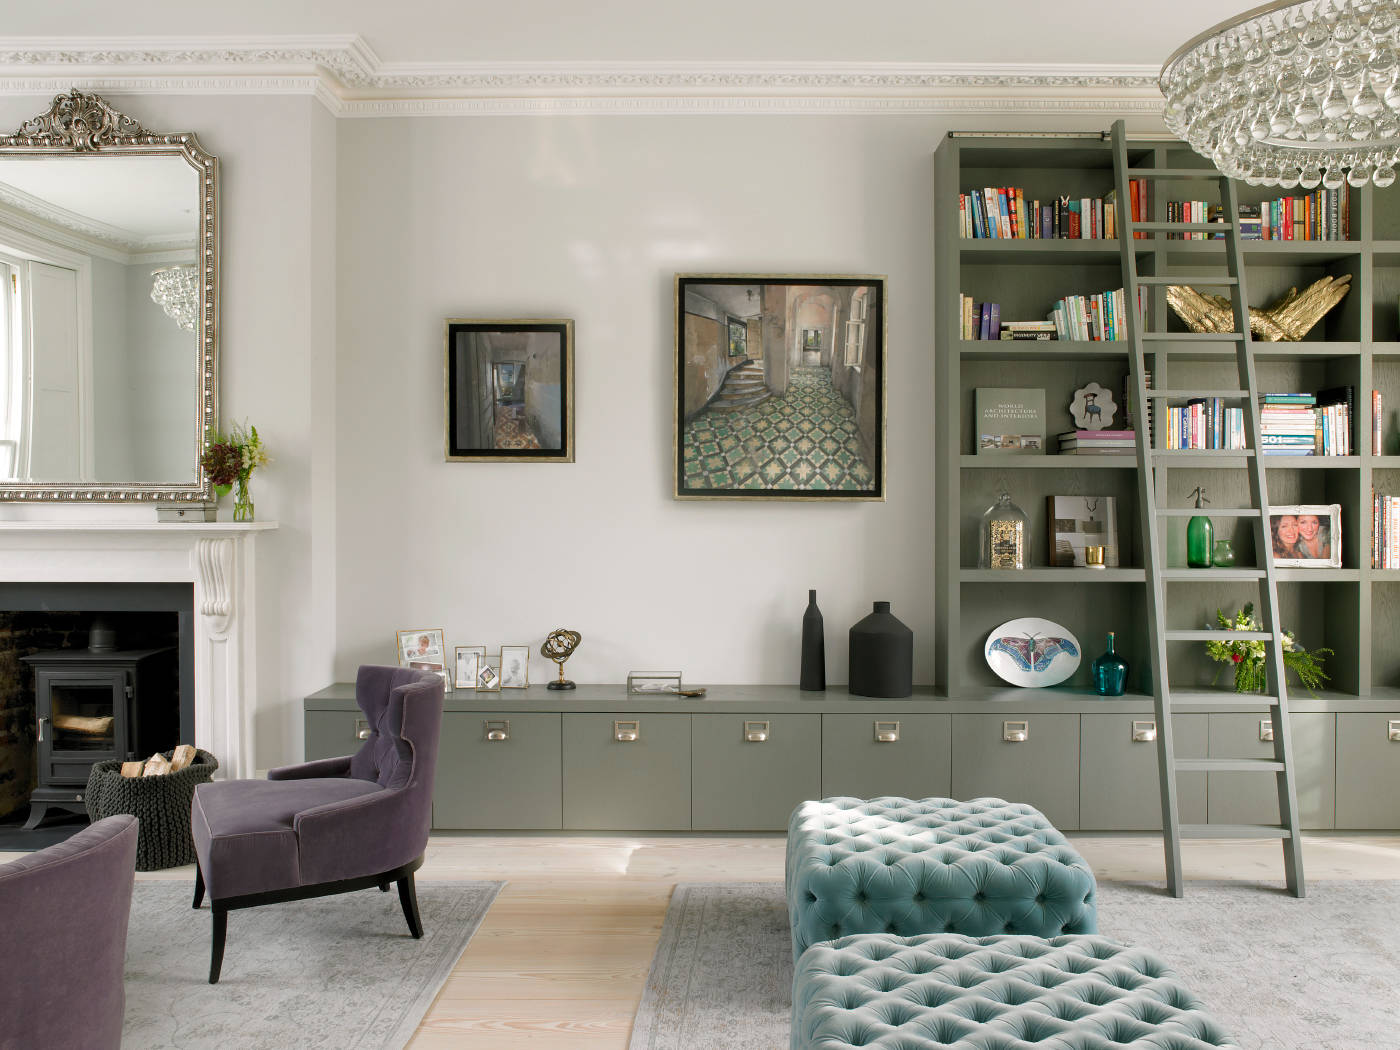 10 Times Built-in Storage Has Transformed a Living Room | Houzz UK